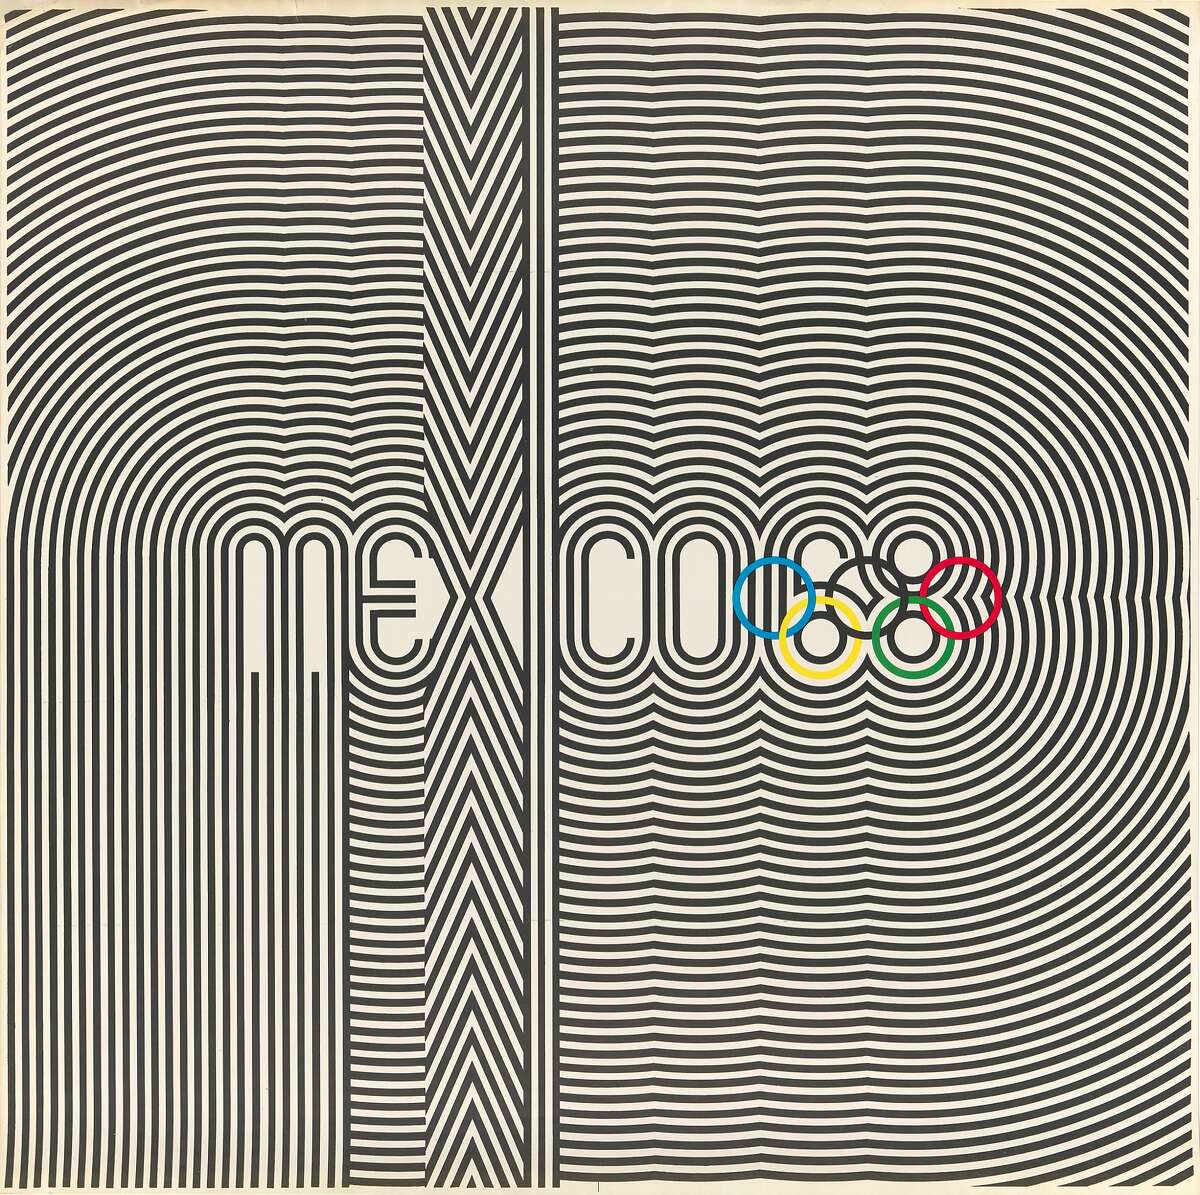 Lance Wyman, Eduardo Terrazas, and Department of Publications and Urban Design, Organizing Committee of the XIX Olympiad, Olympic logo poster, 1967; San Francisco Museum of Modern Art, Accessions Committee Fund purchase; � Lance Wyman